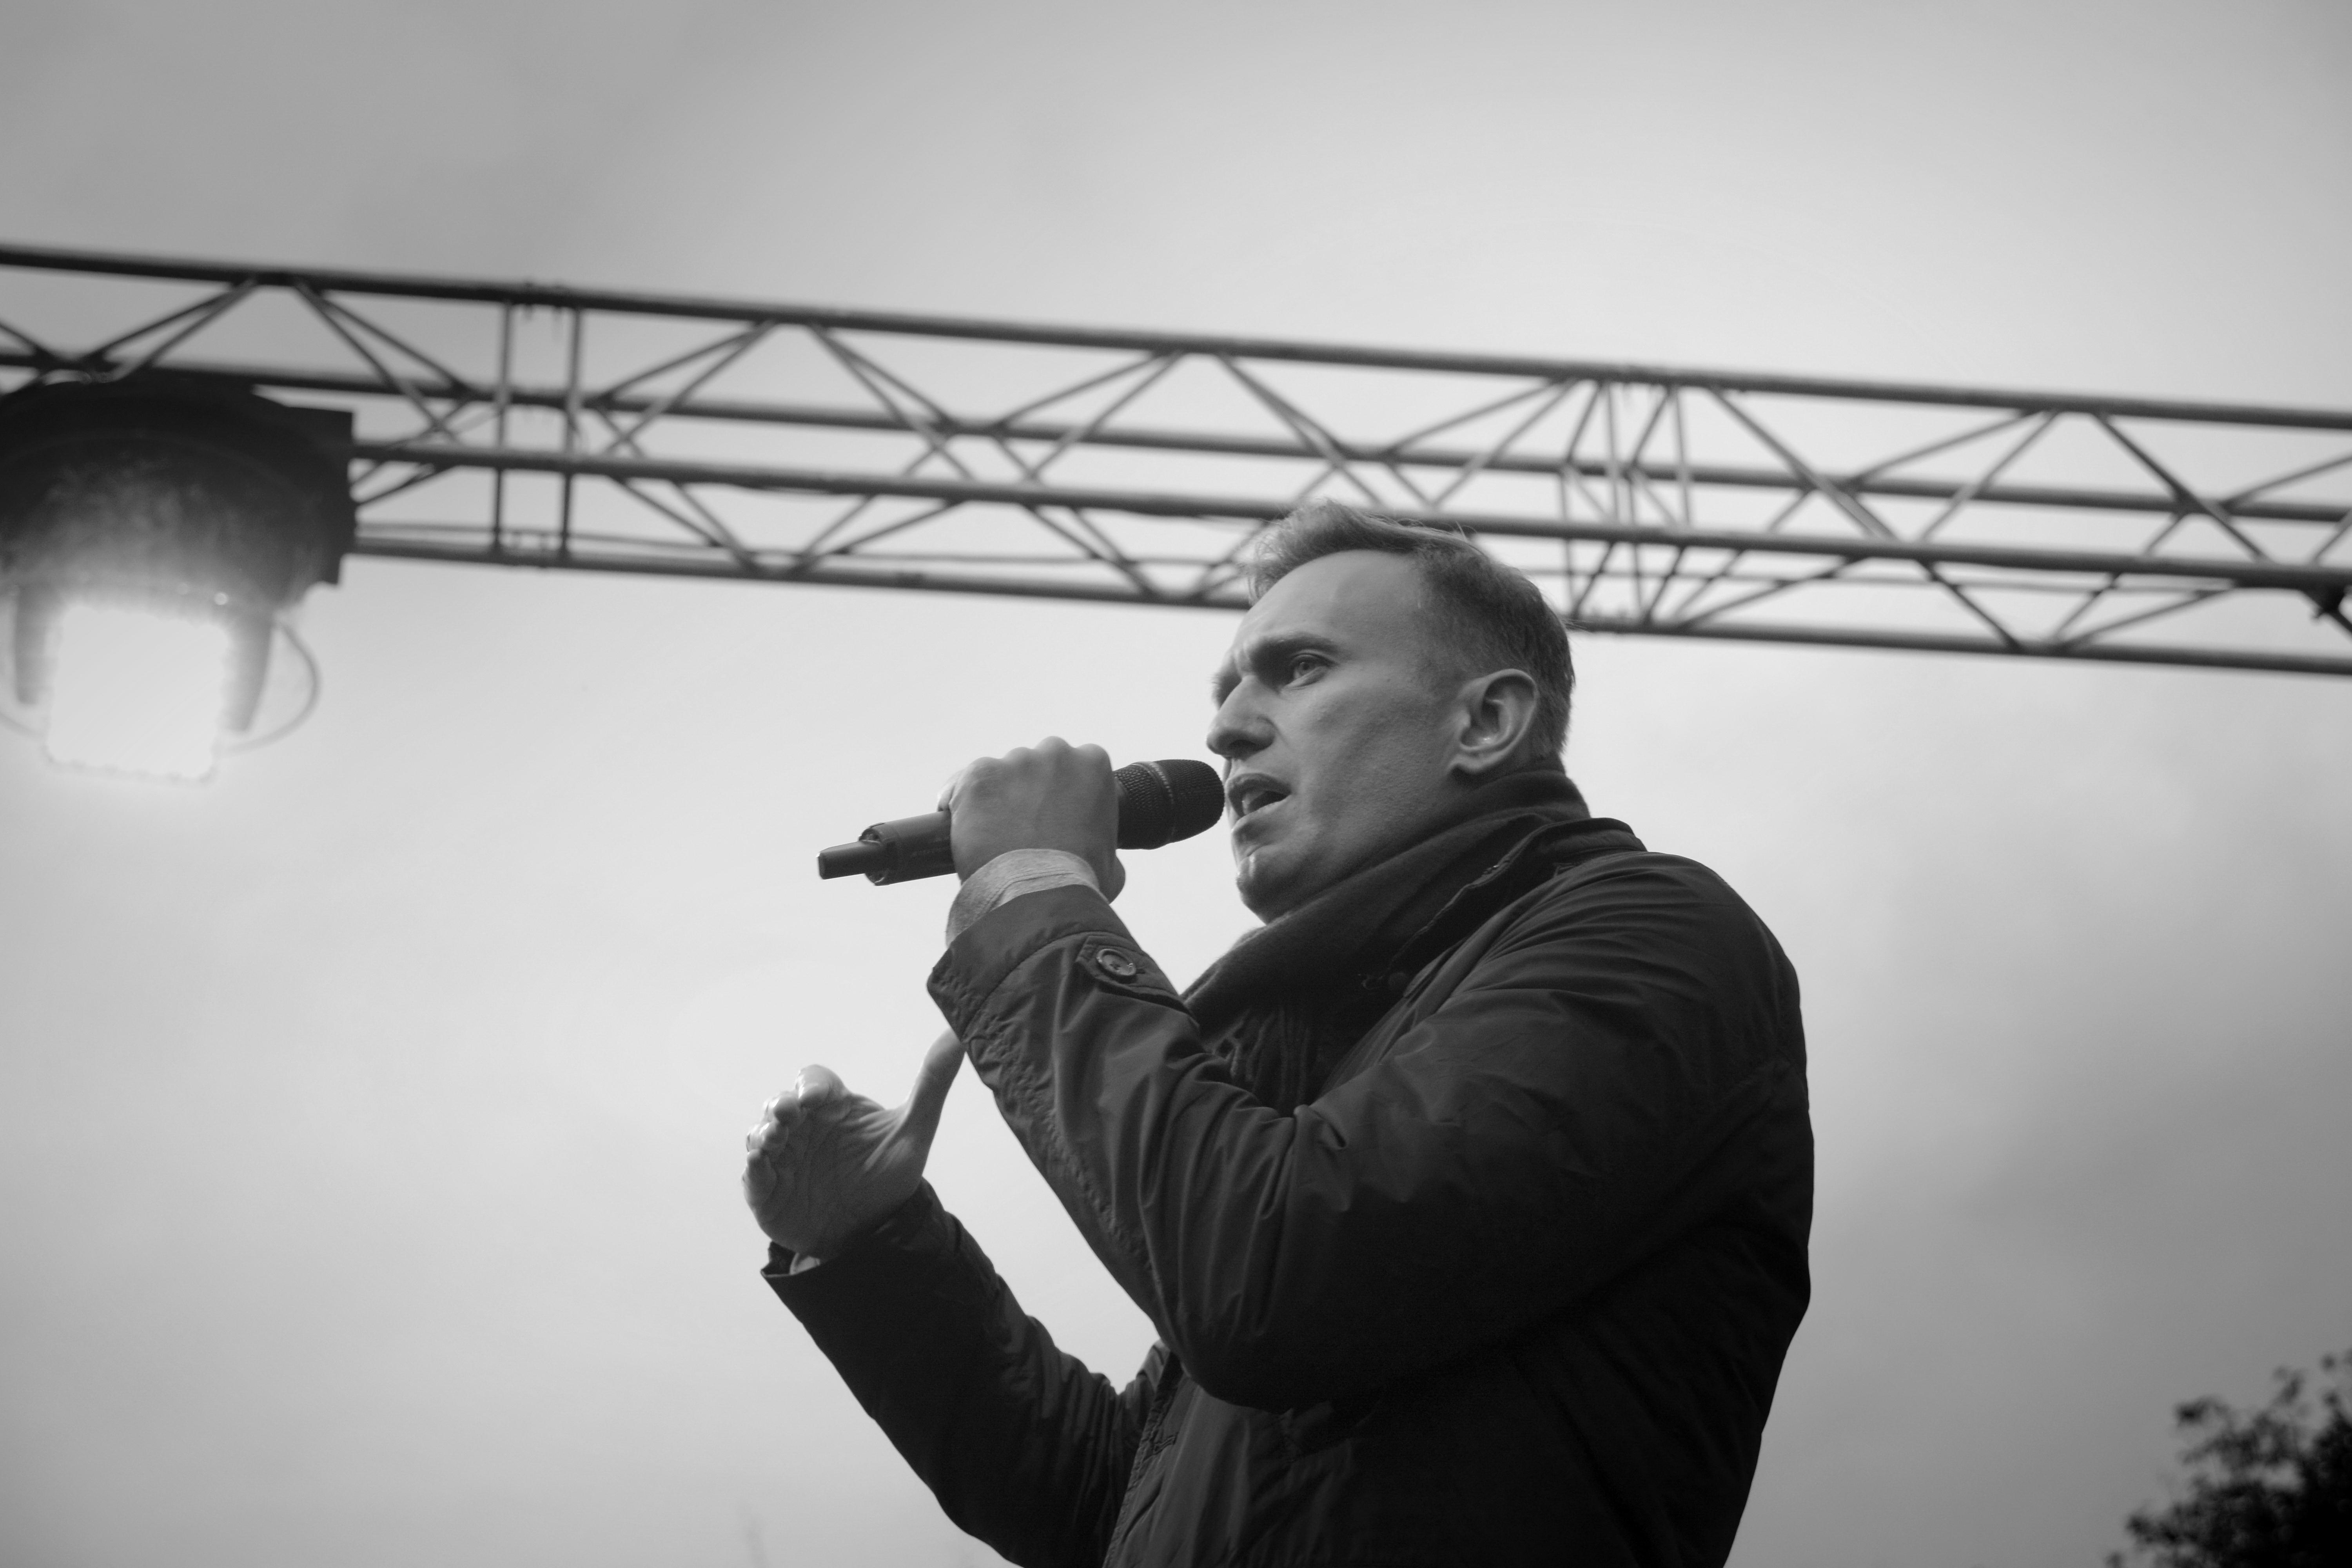 Omsk,Russia-September 27, 2018. Opposition politician Alexei Navalny speaks at a rally among his supporters